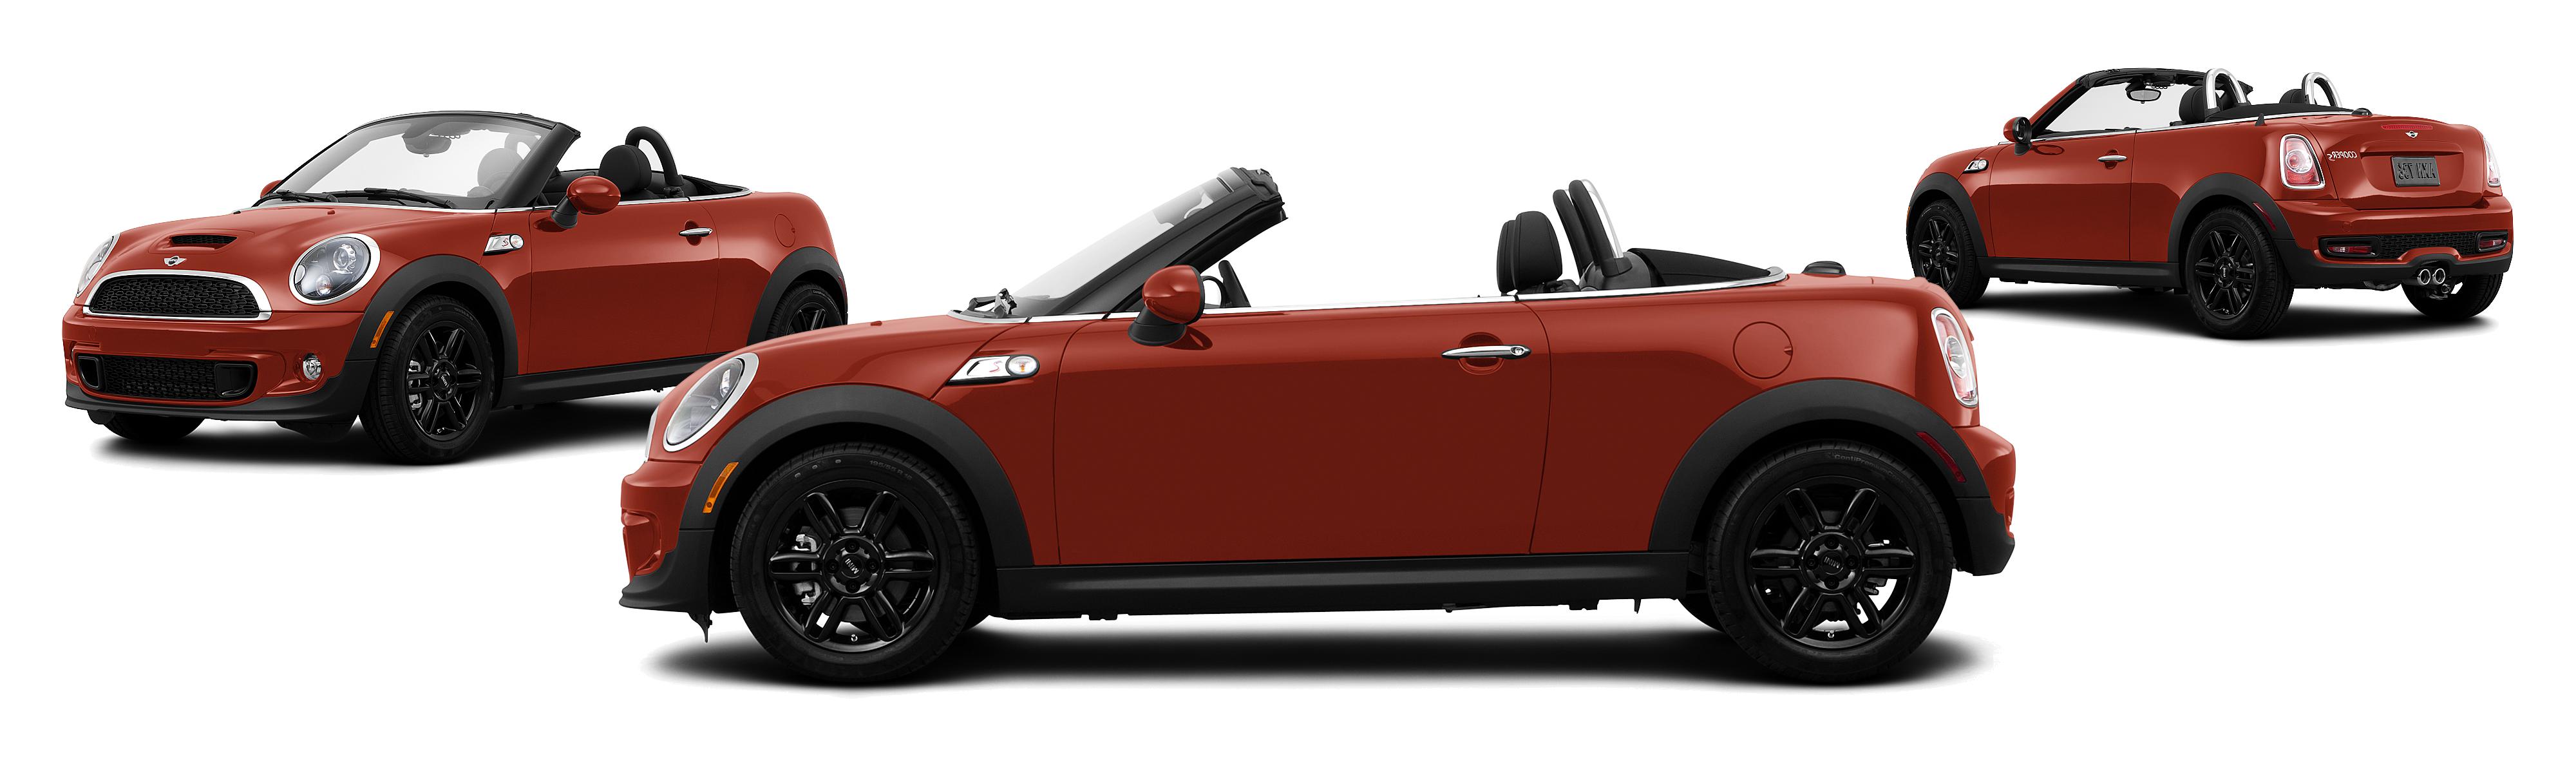 2014 MINI Roadster Cooper S 2dr Convertible - Research - GrooveCar